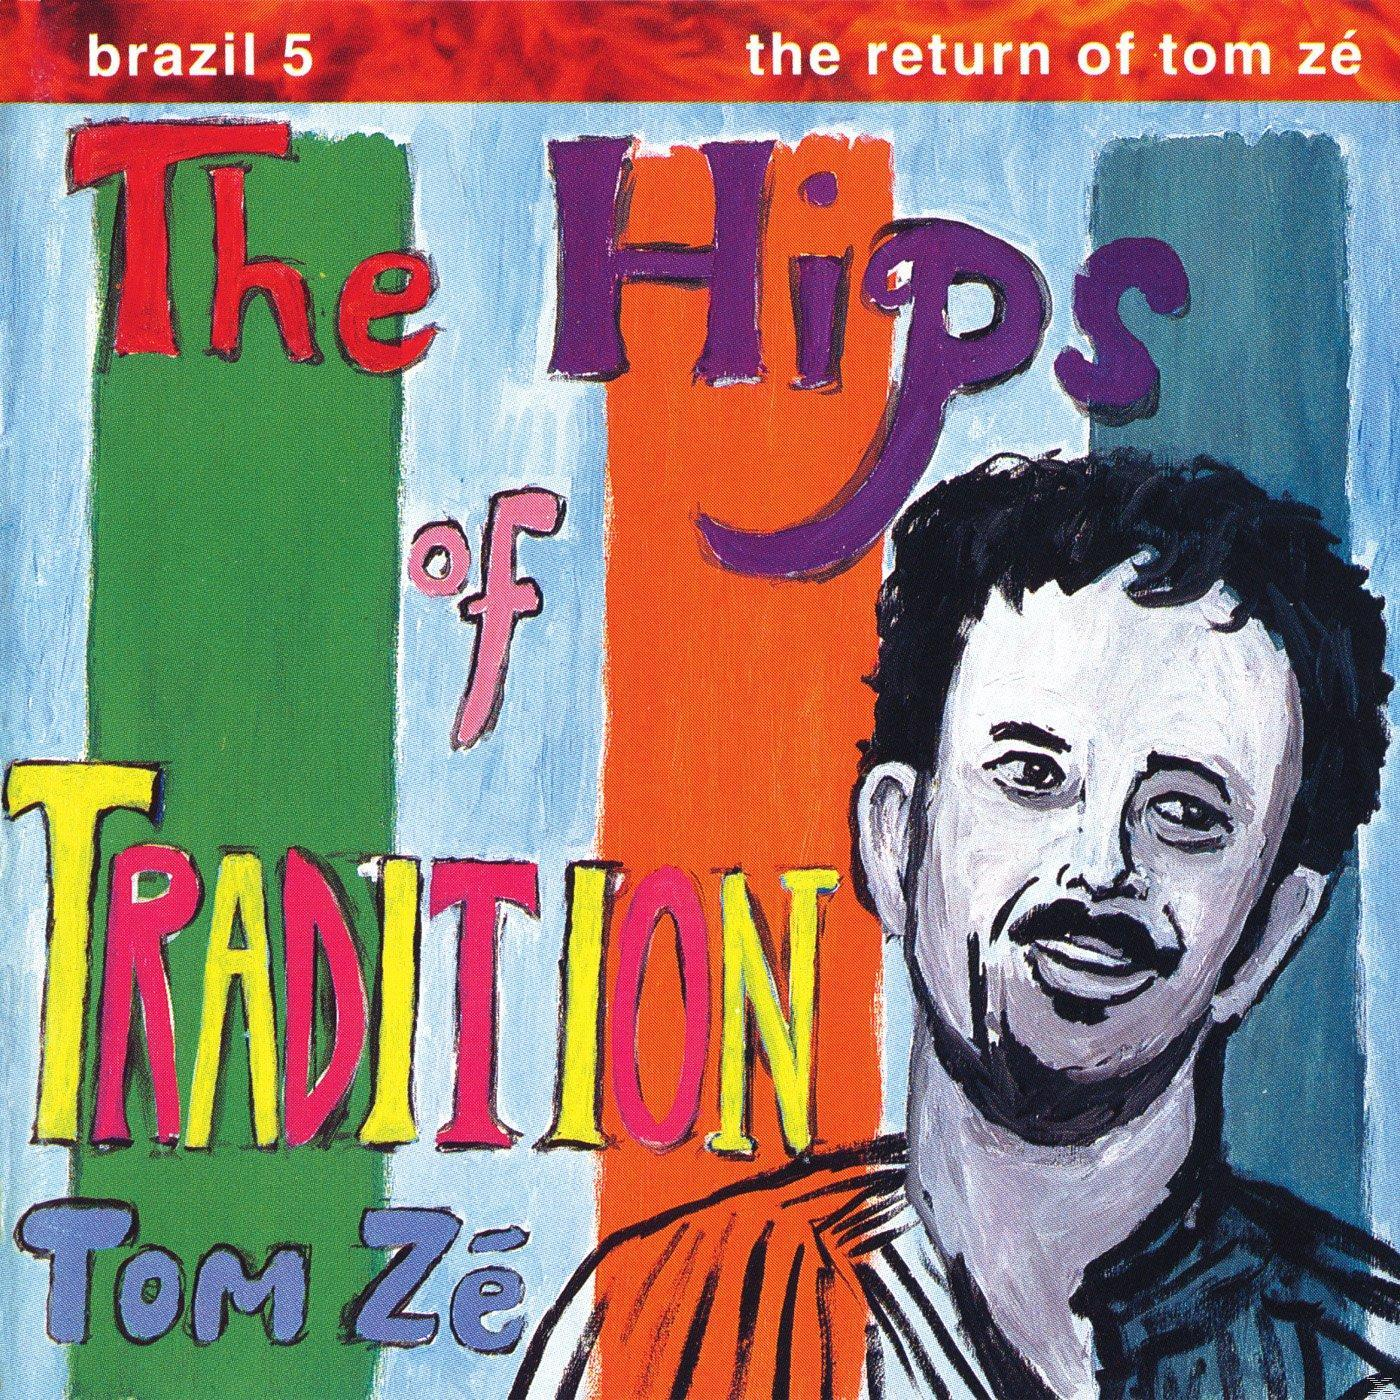 Of - - The Brazil VARIOUS 5: Ret Tradition-The Classics Hips (Vinyl)